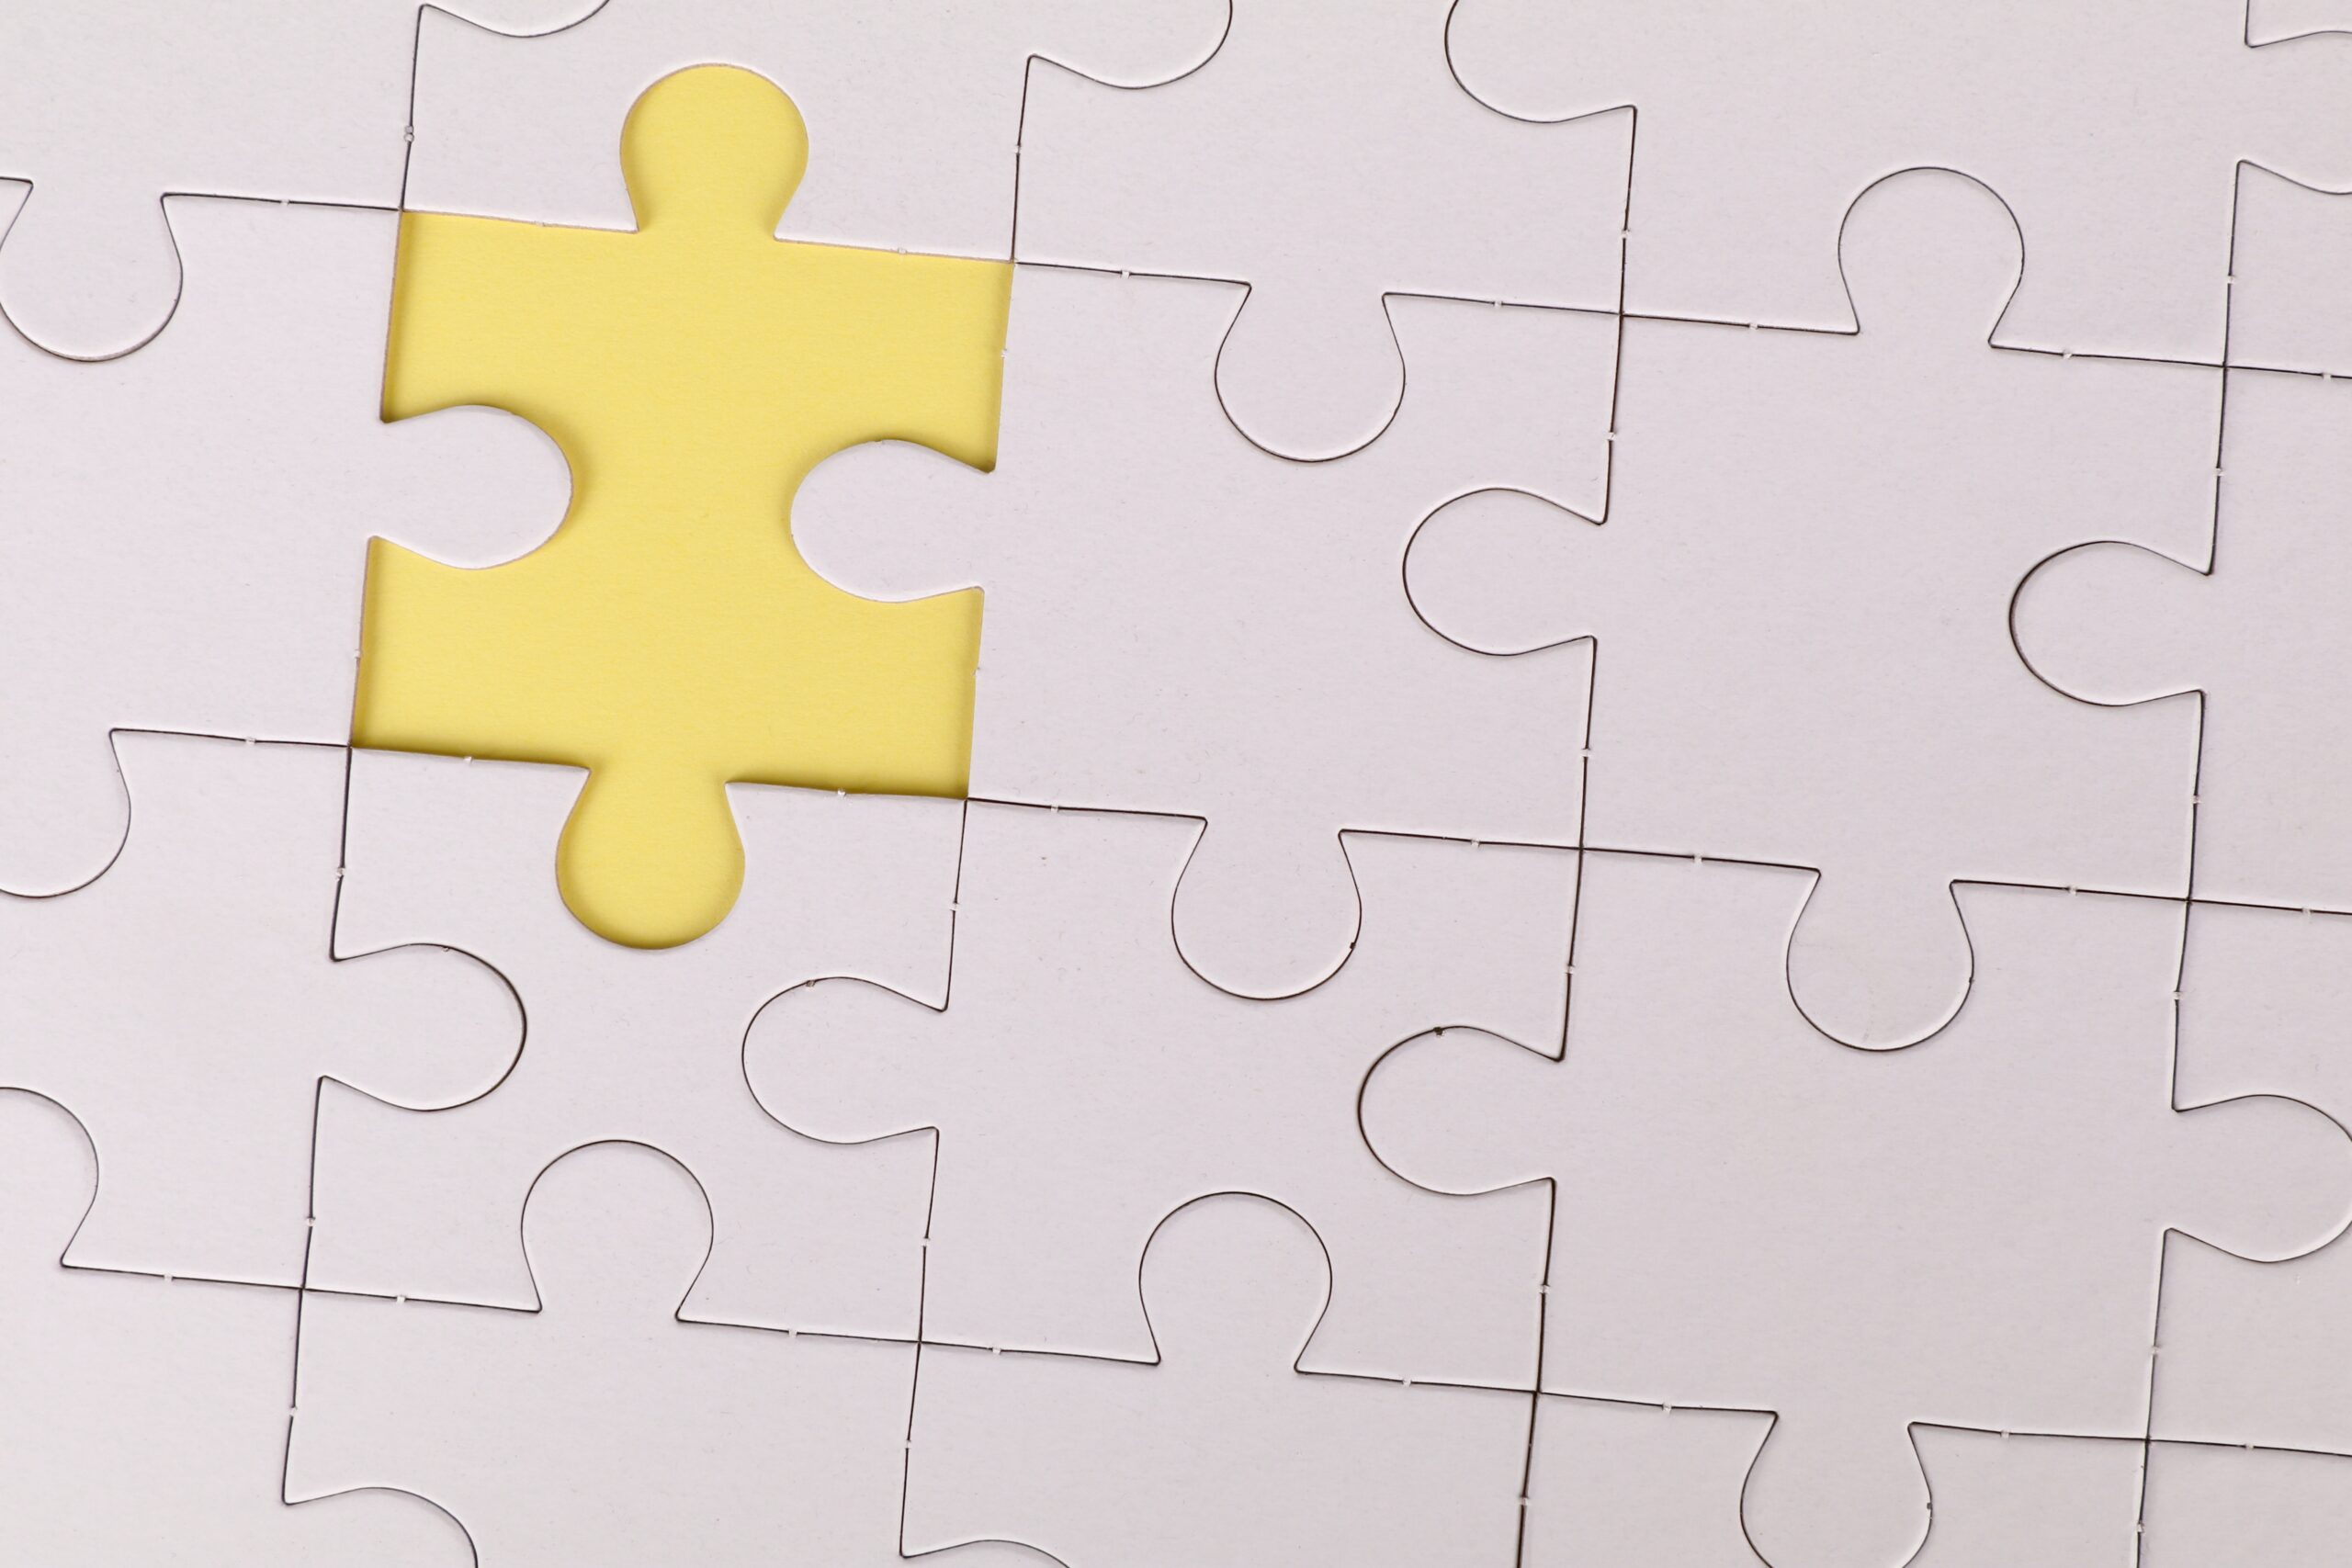 White puzzle pieces assembled with one piece missing, revealing a contrasting yellow surface